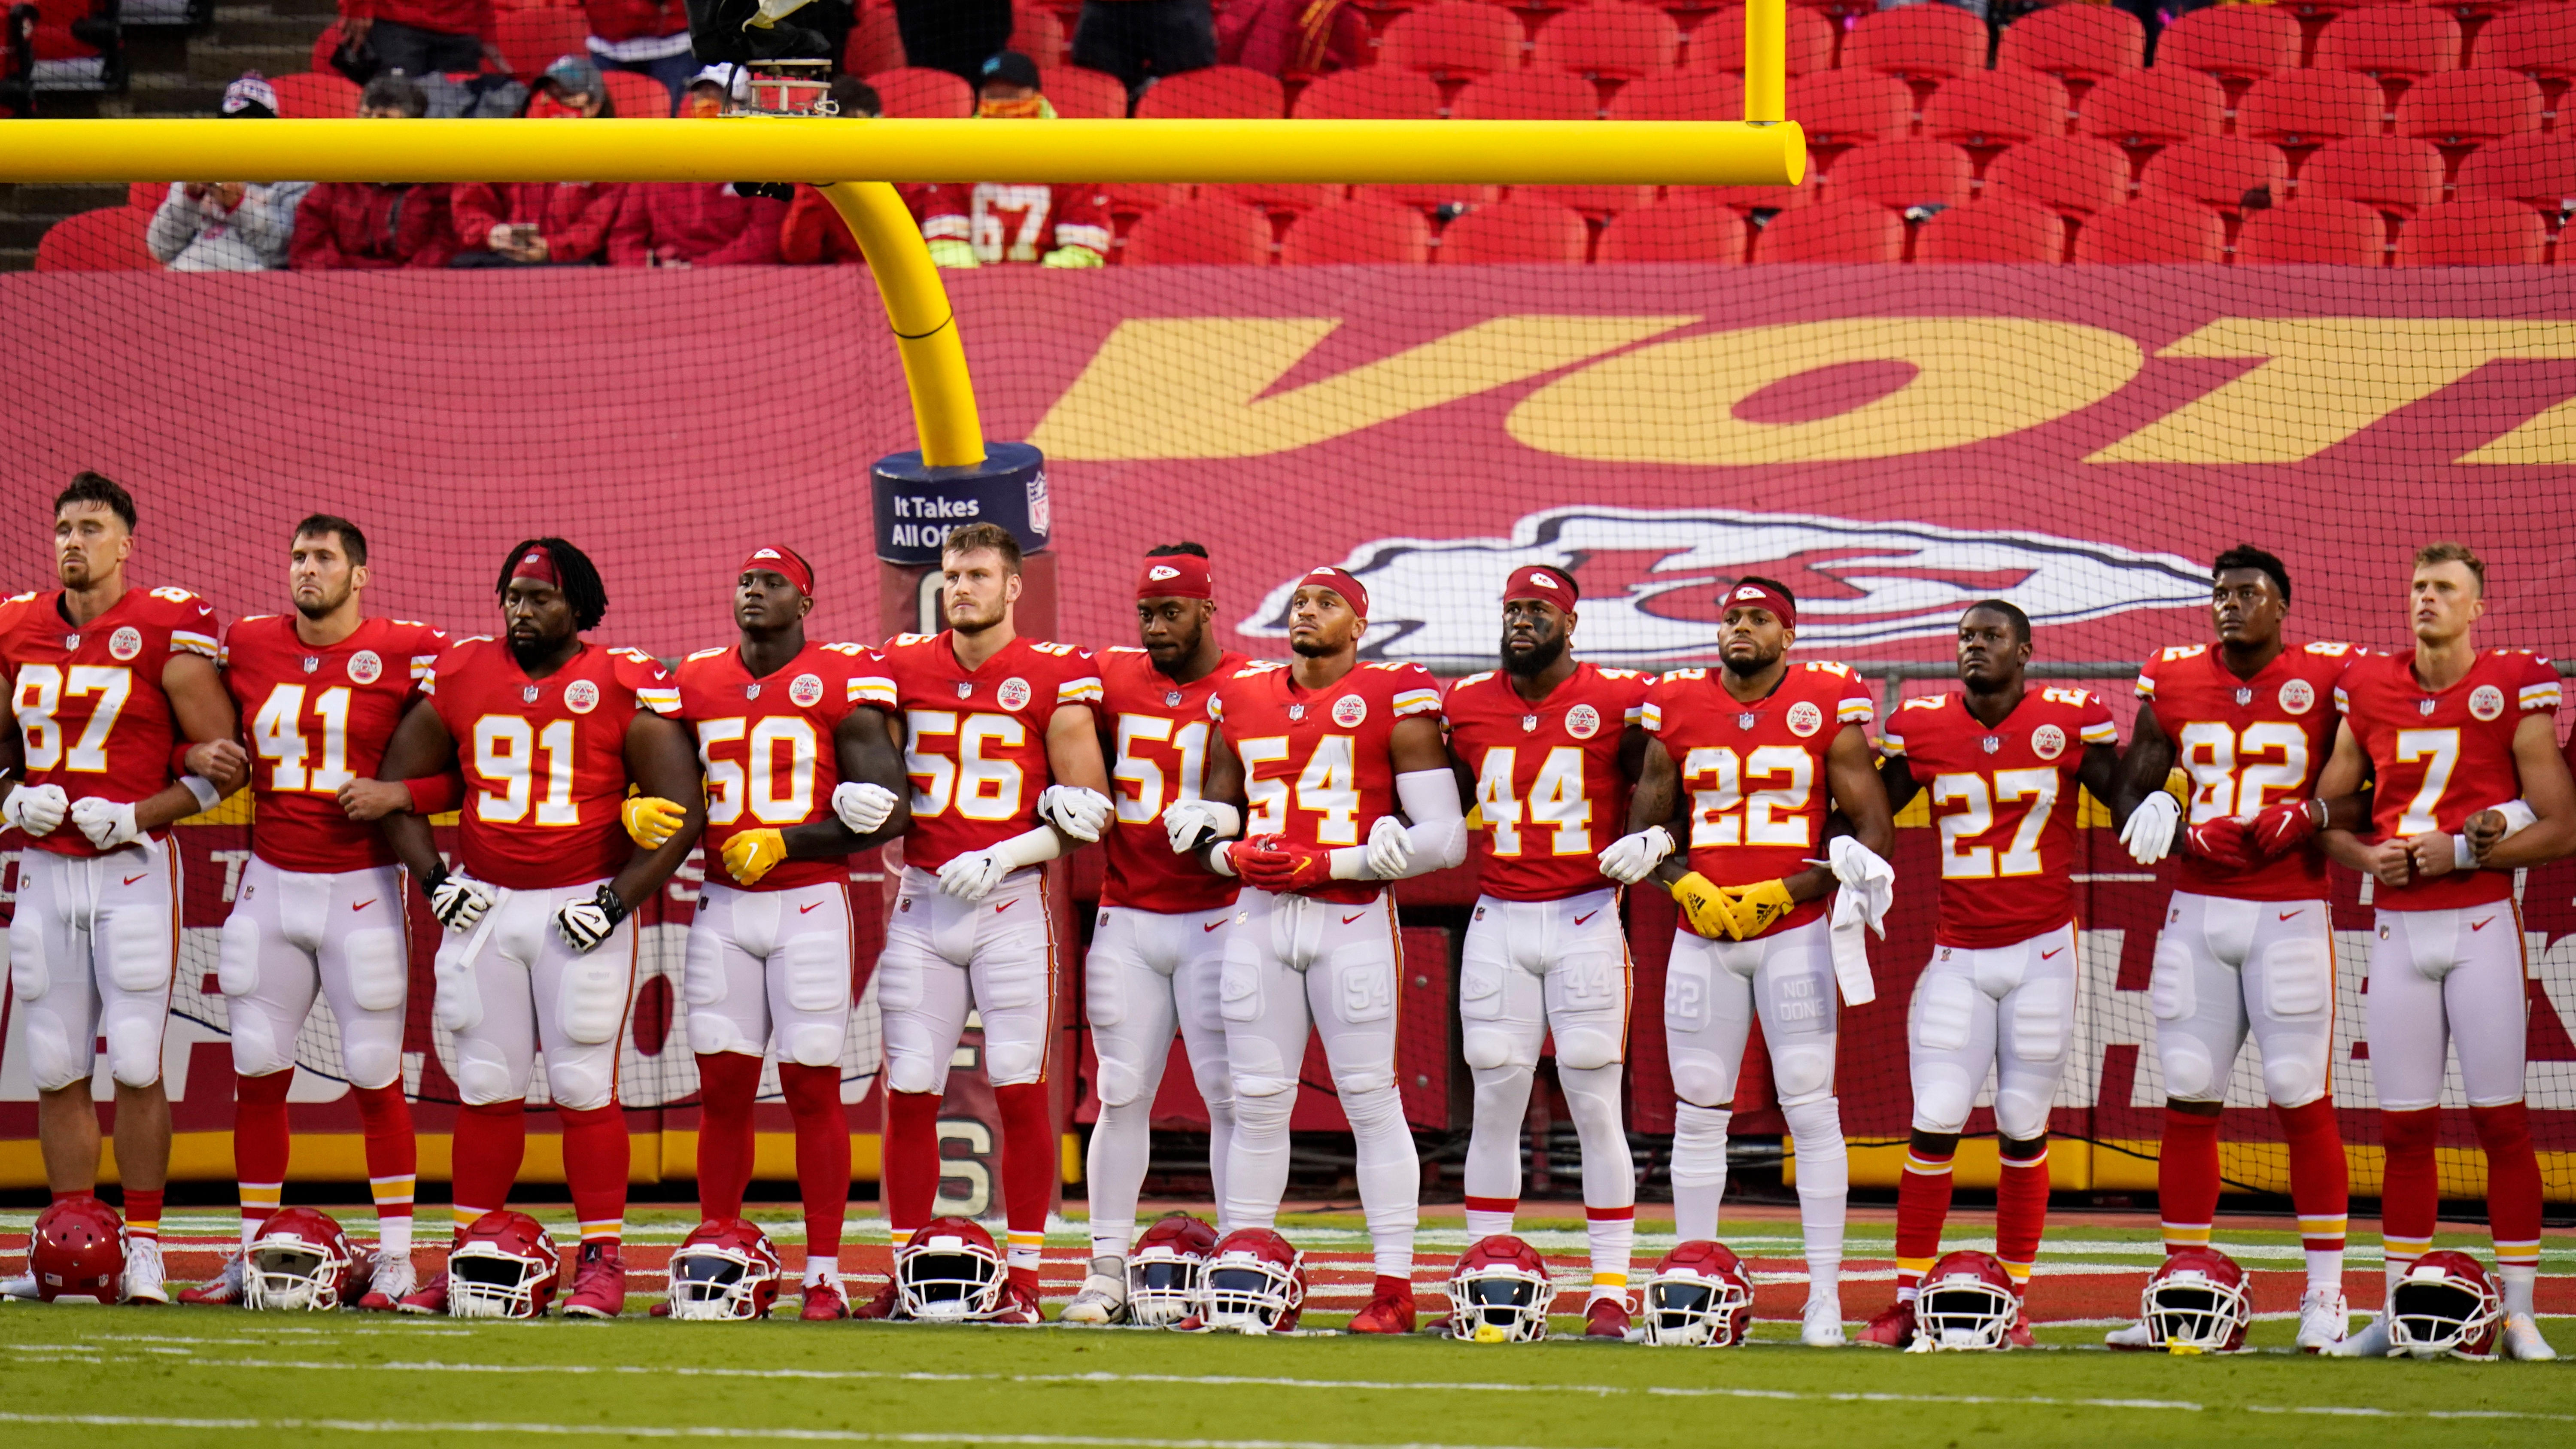 Kansas City Chiefs fans boo teams during display of unity against racism,  social injustice